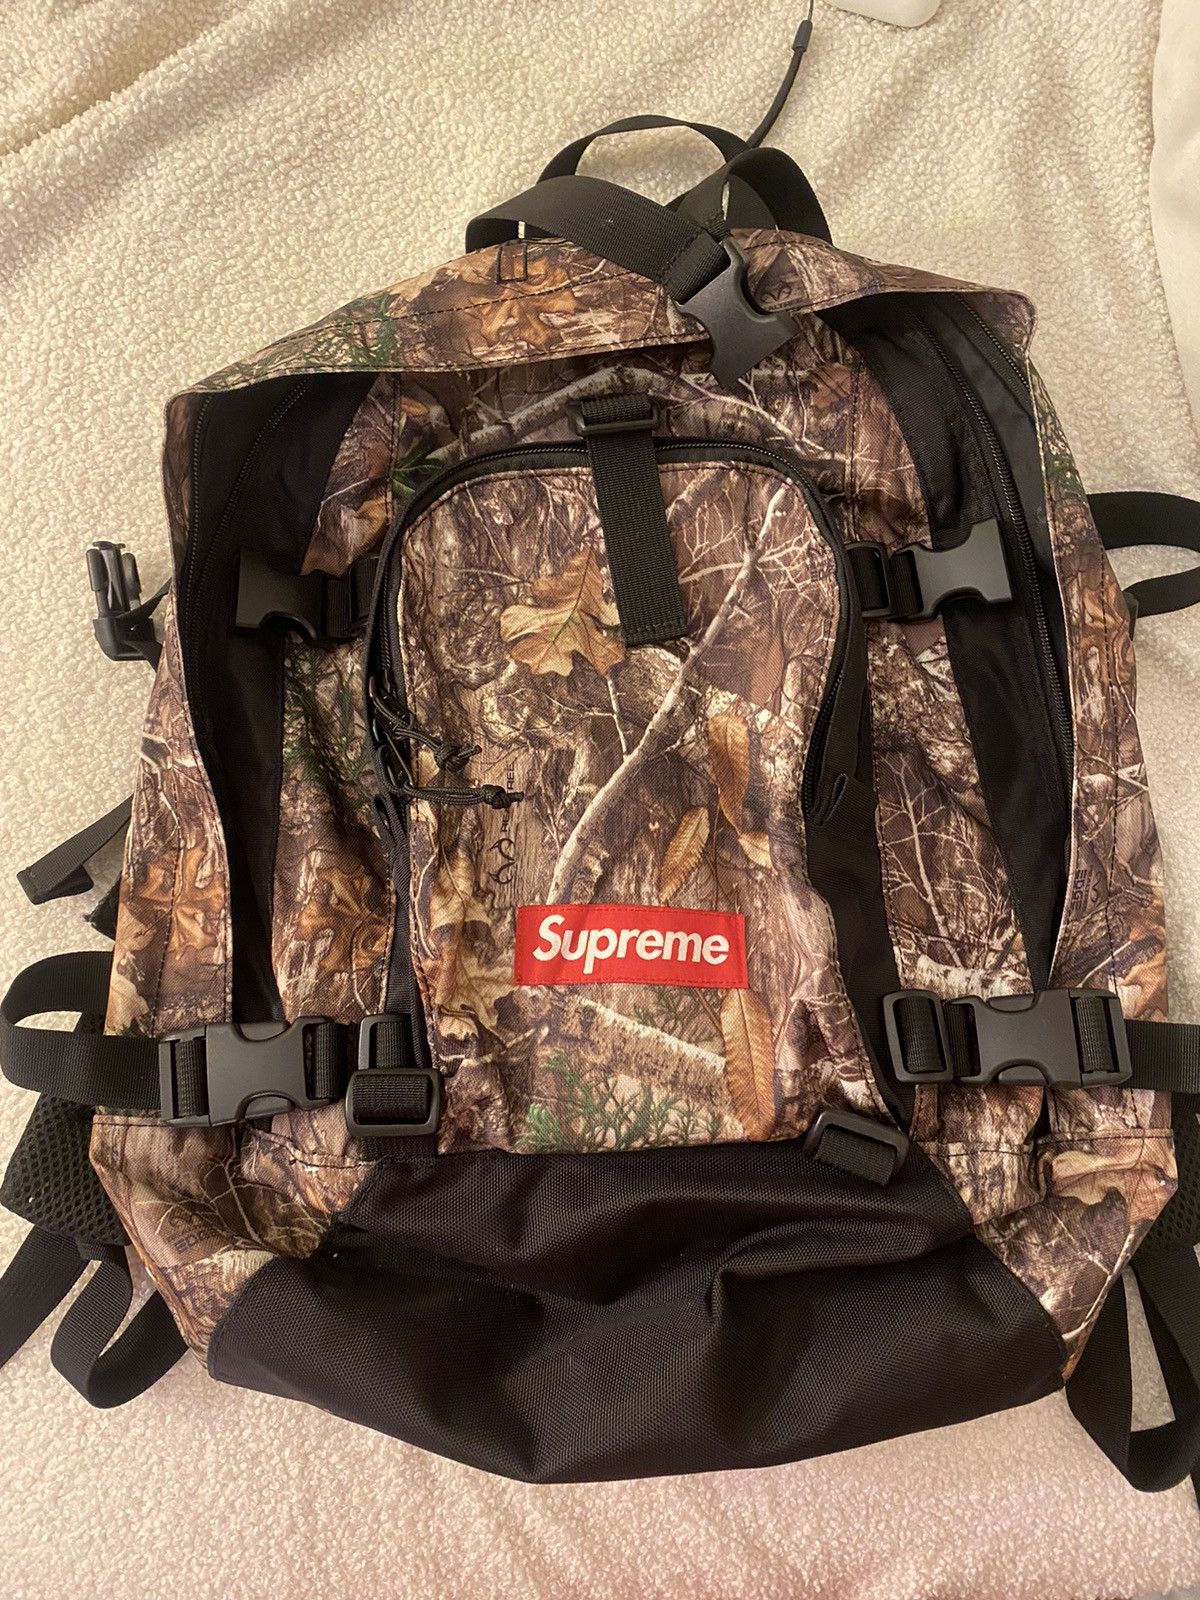 19fw supreme Backpack 10 Real Tree Camo - バッグパック/リュック